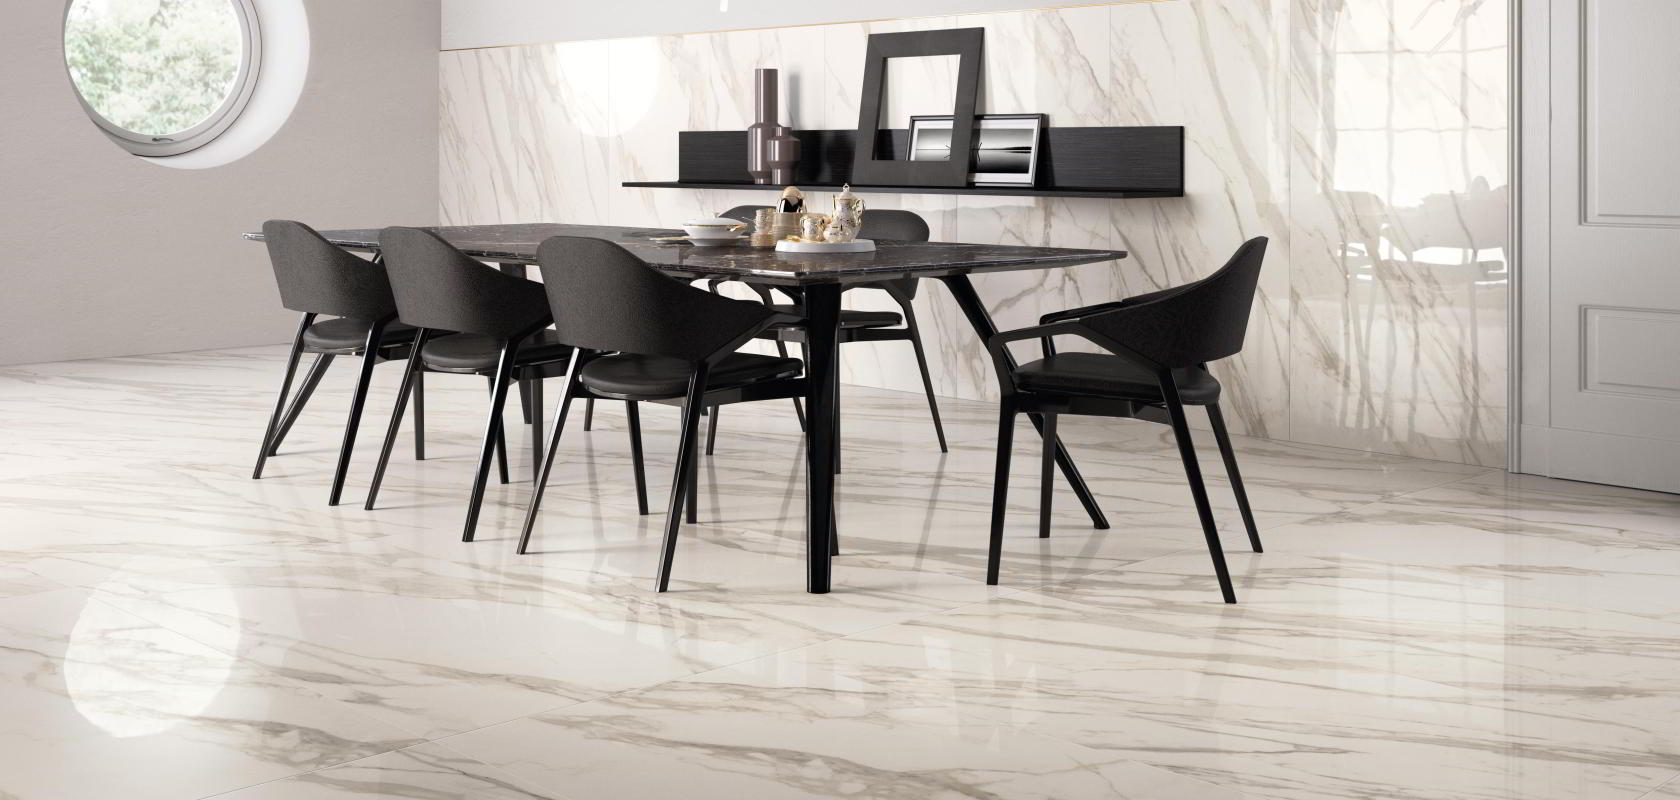 PPD8 Напольный Purity Marble Paradiso lux 120x278 - фото 7